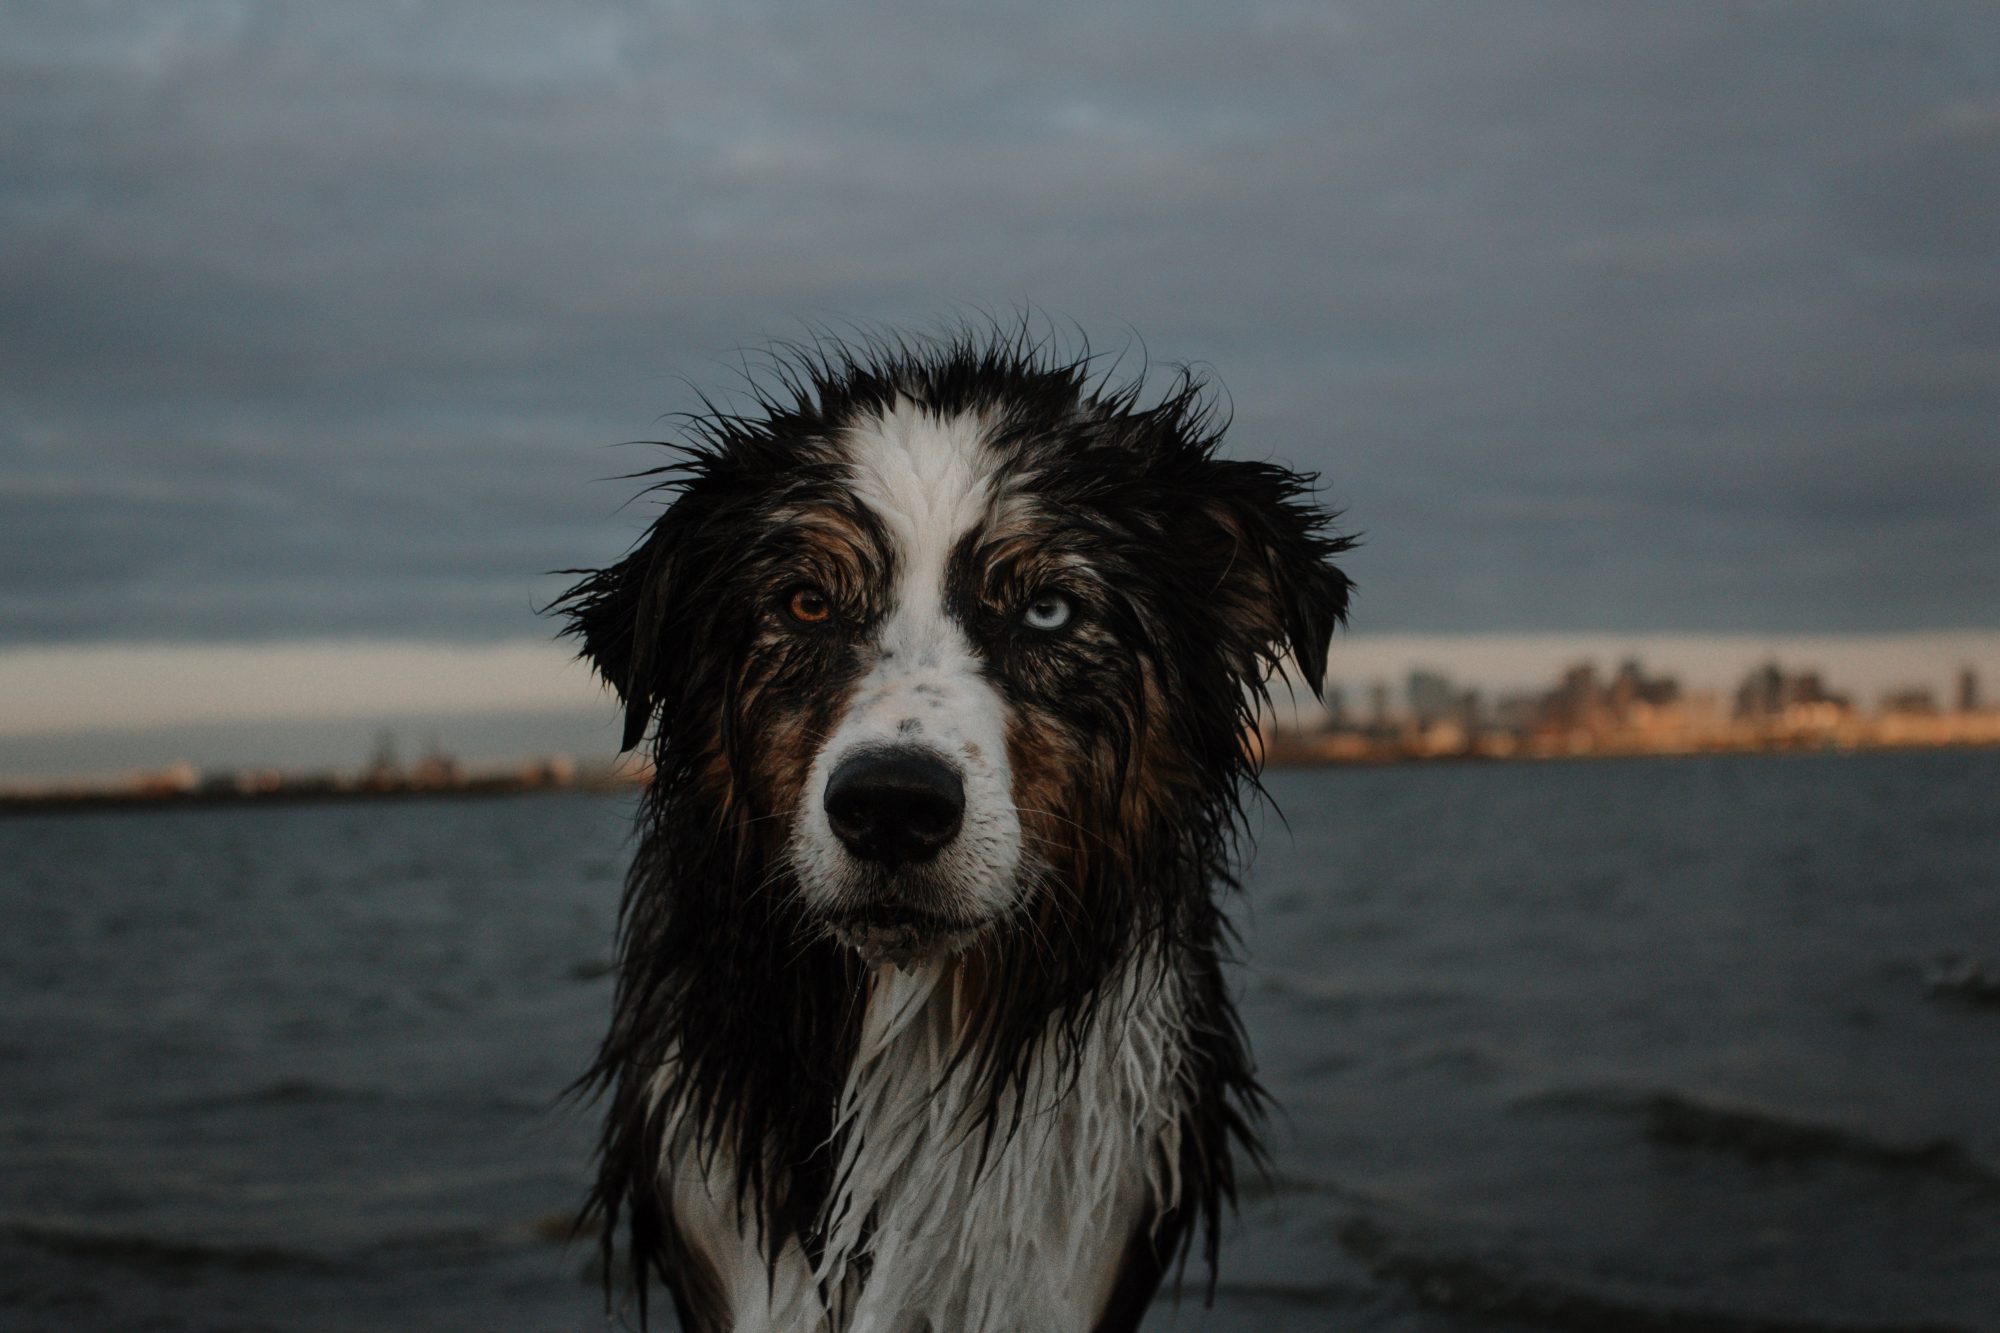 How to Level Up Your Pet Photos | Pet Photography Tips by popular New England photographer, Shannon Shipman: image of a wet dog by the ocean. 